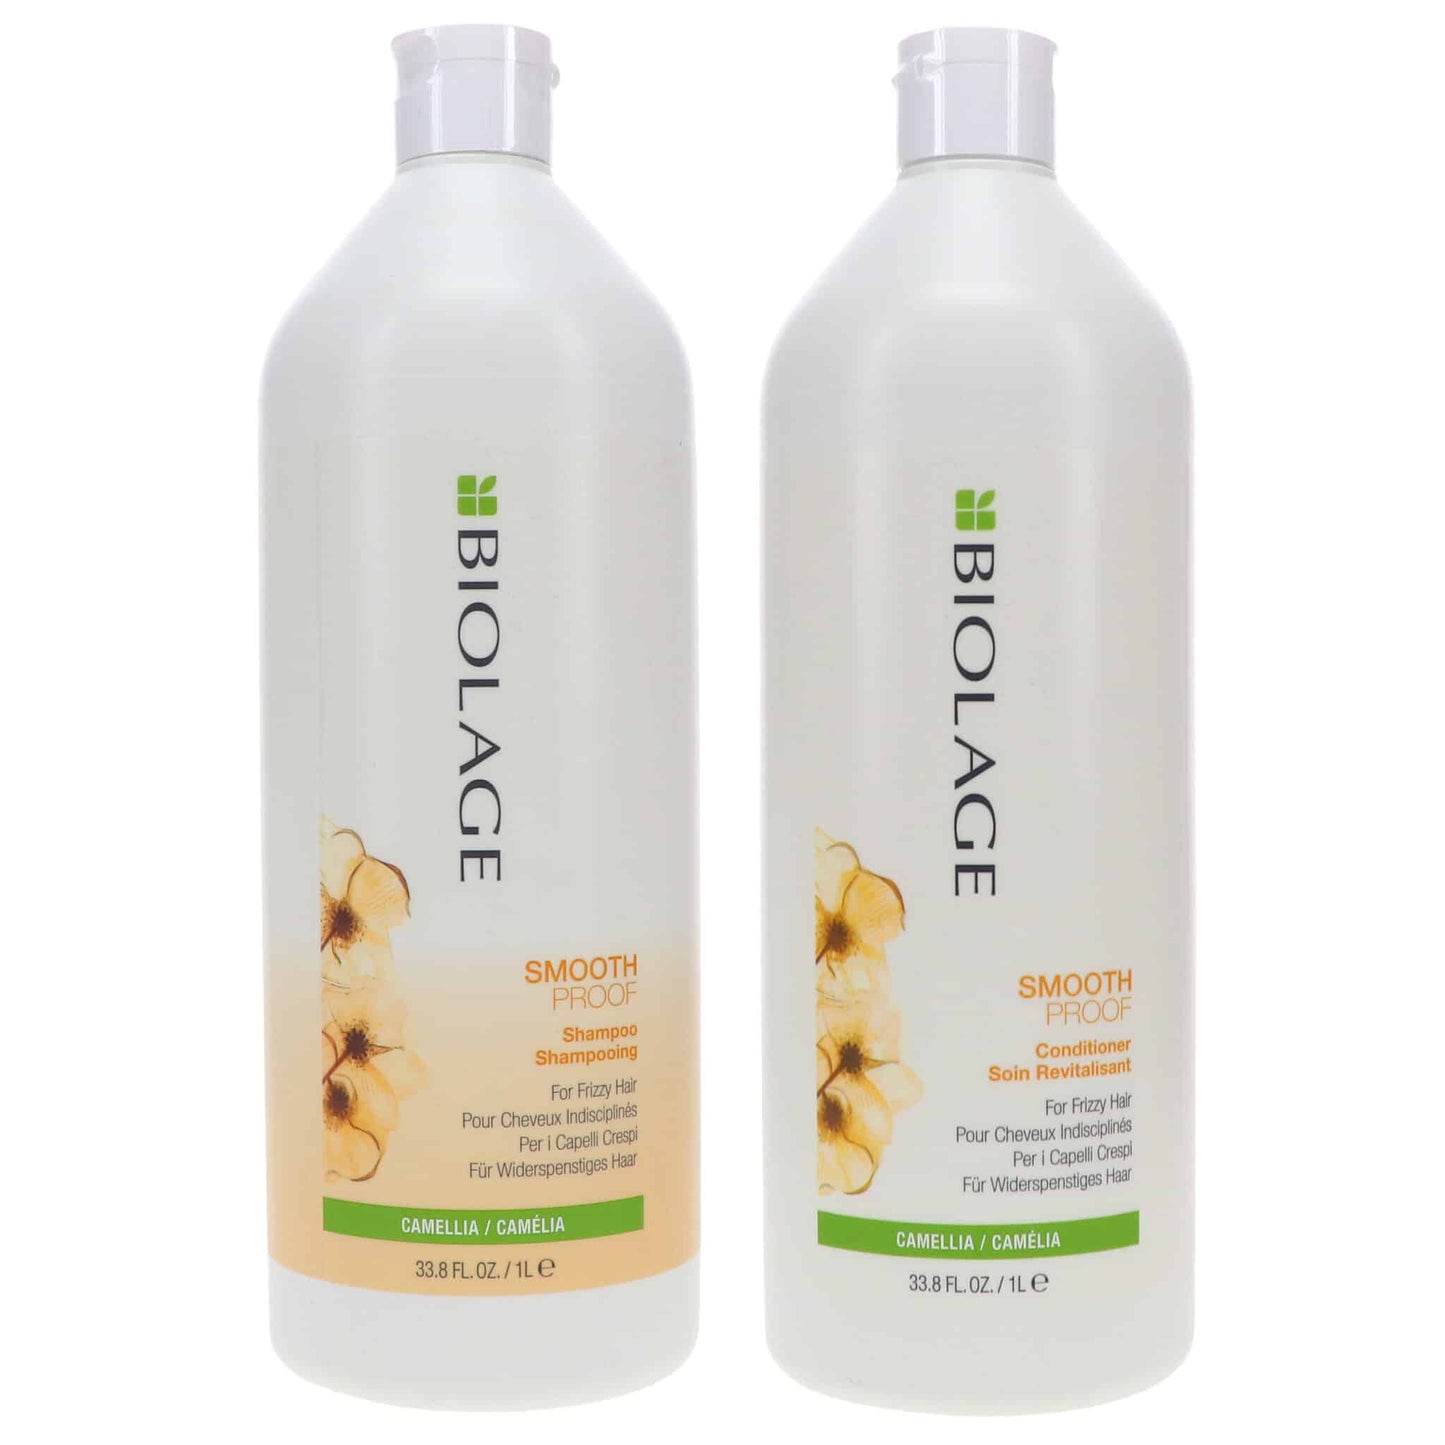 Matrix Biolage SmoothProof for Frizzy Hair Shampoo and Conditioner DUO